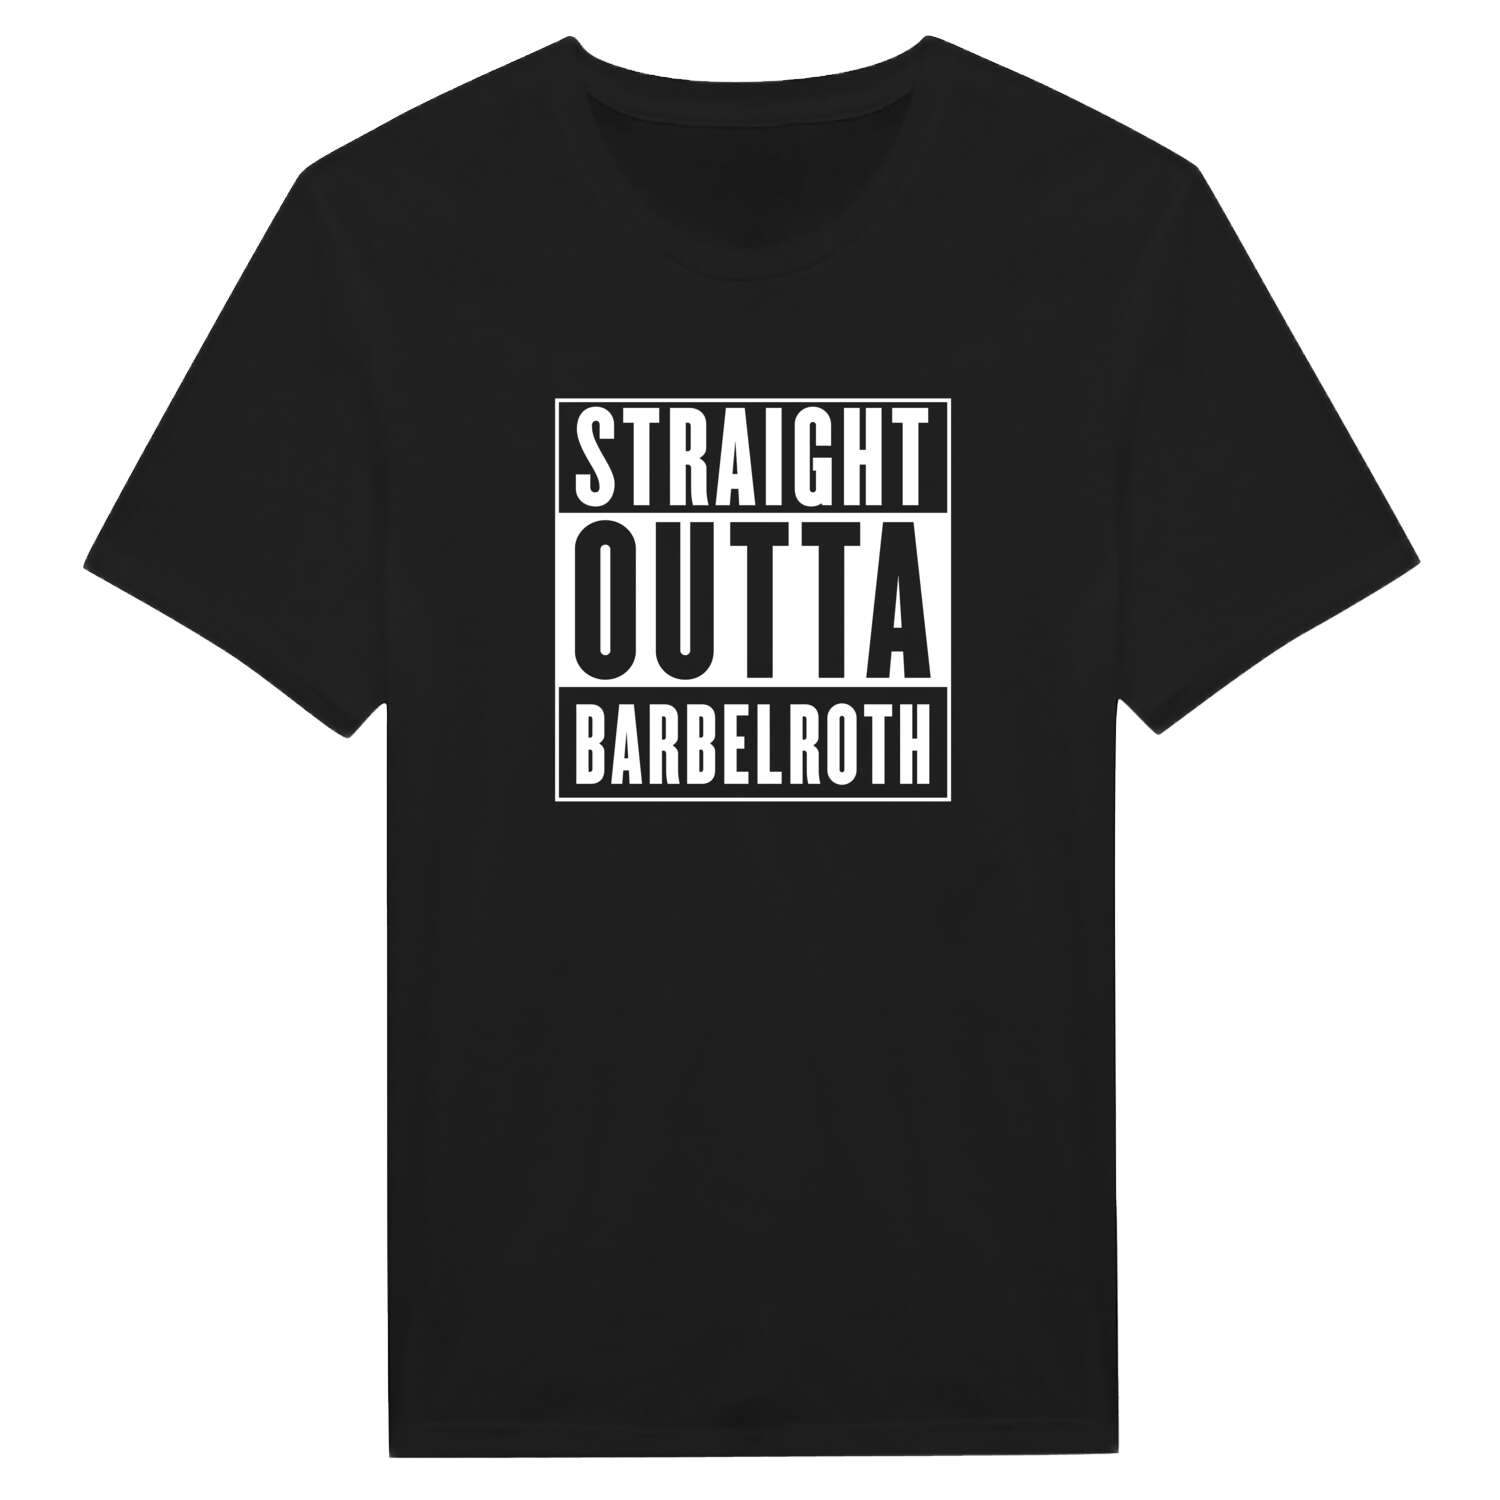 Barbelroth T-Shirt »Straight Outta«